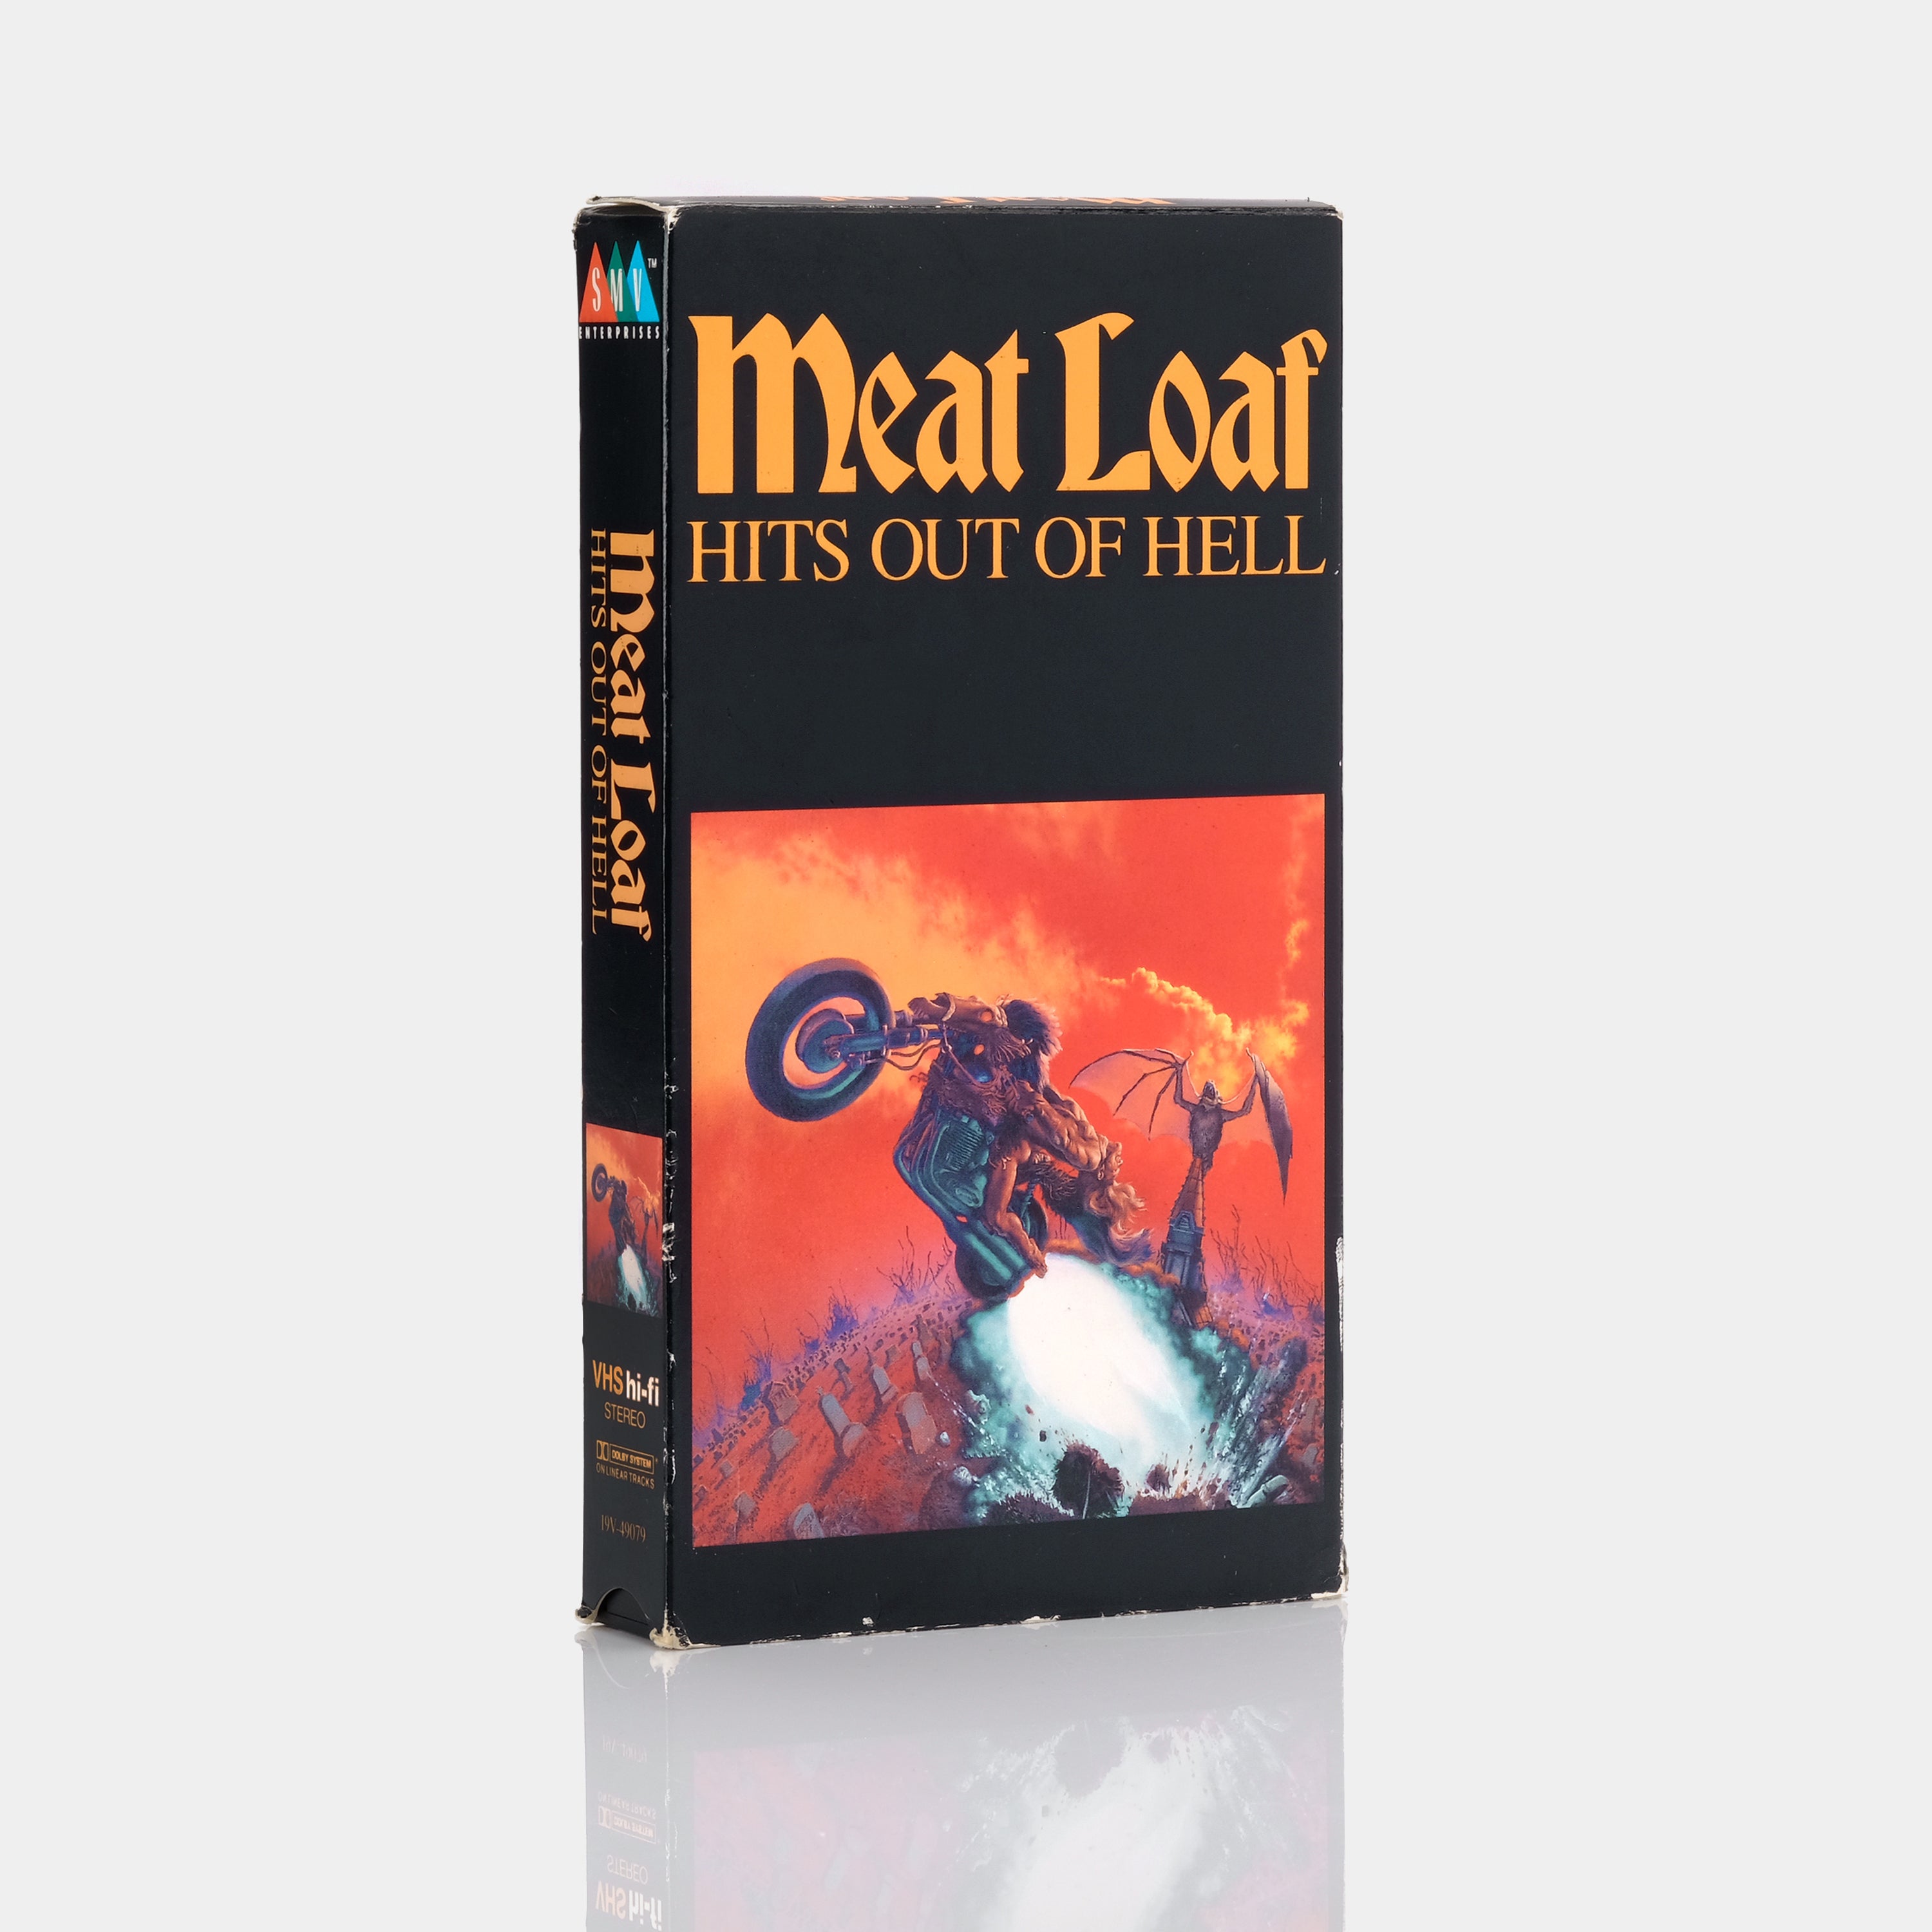 Meat Loaf: Hits Out of Hell VHS Tape